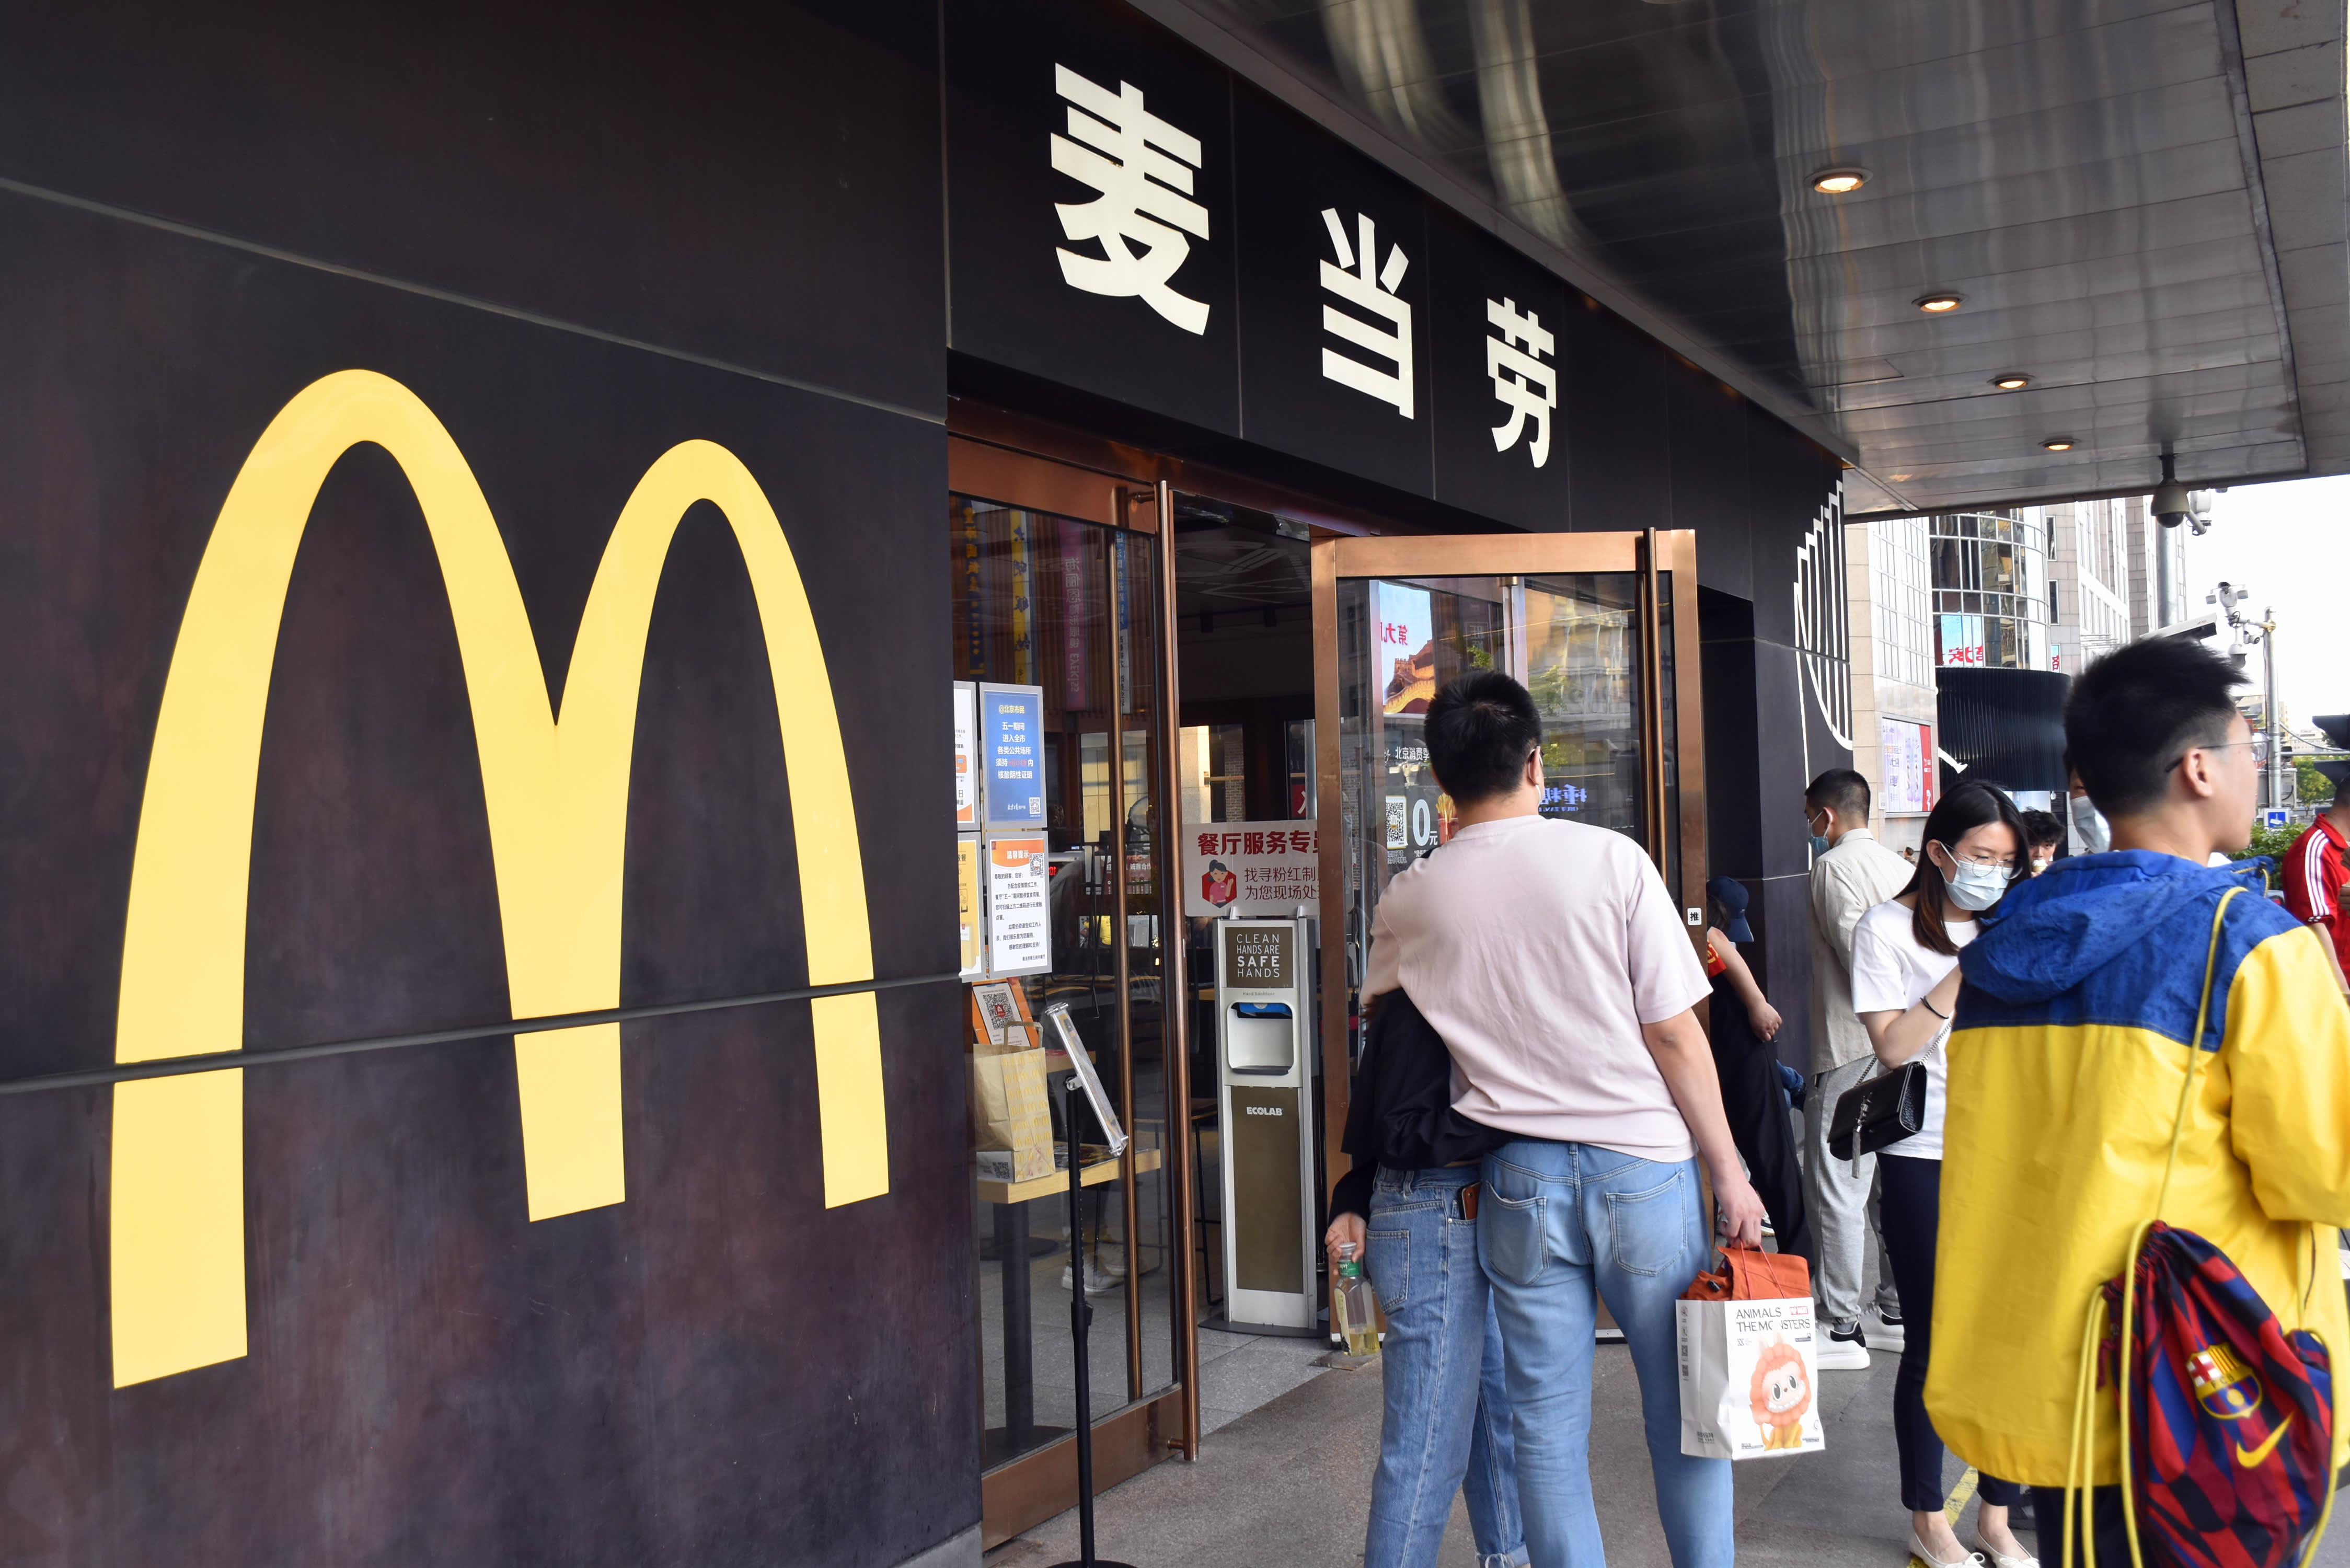 McDonald’s Increases Its Stake in Chinese Operations with Emphasis on Minority Participation